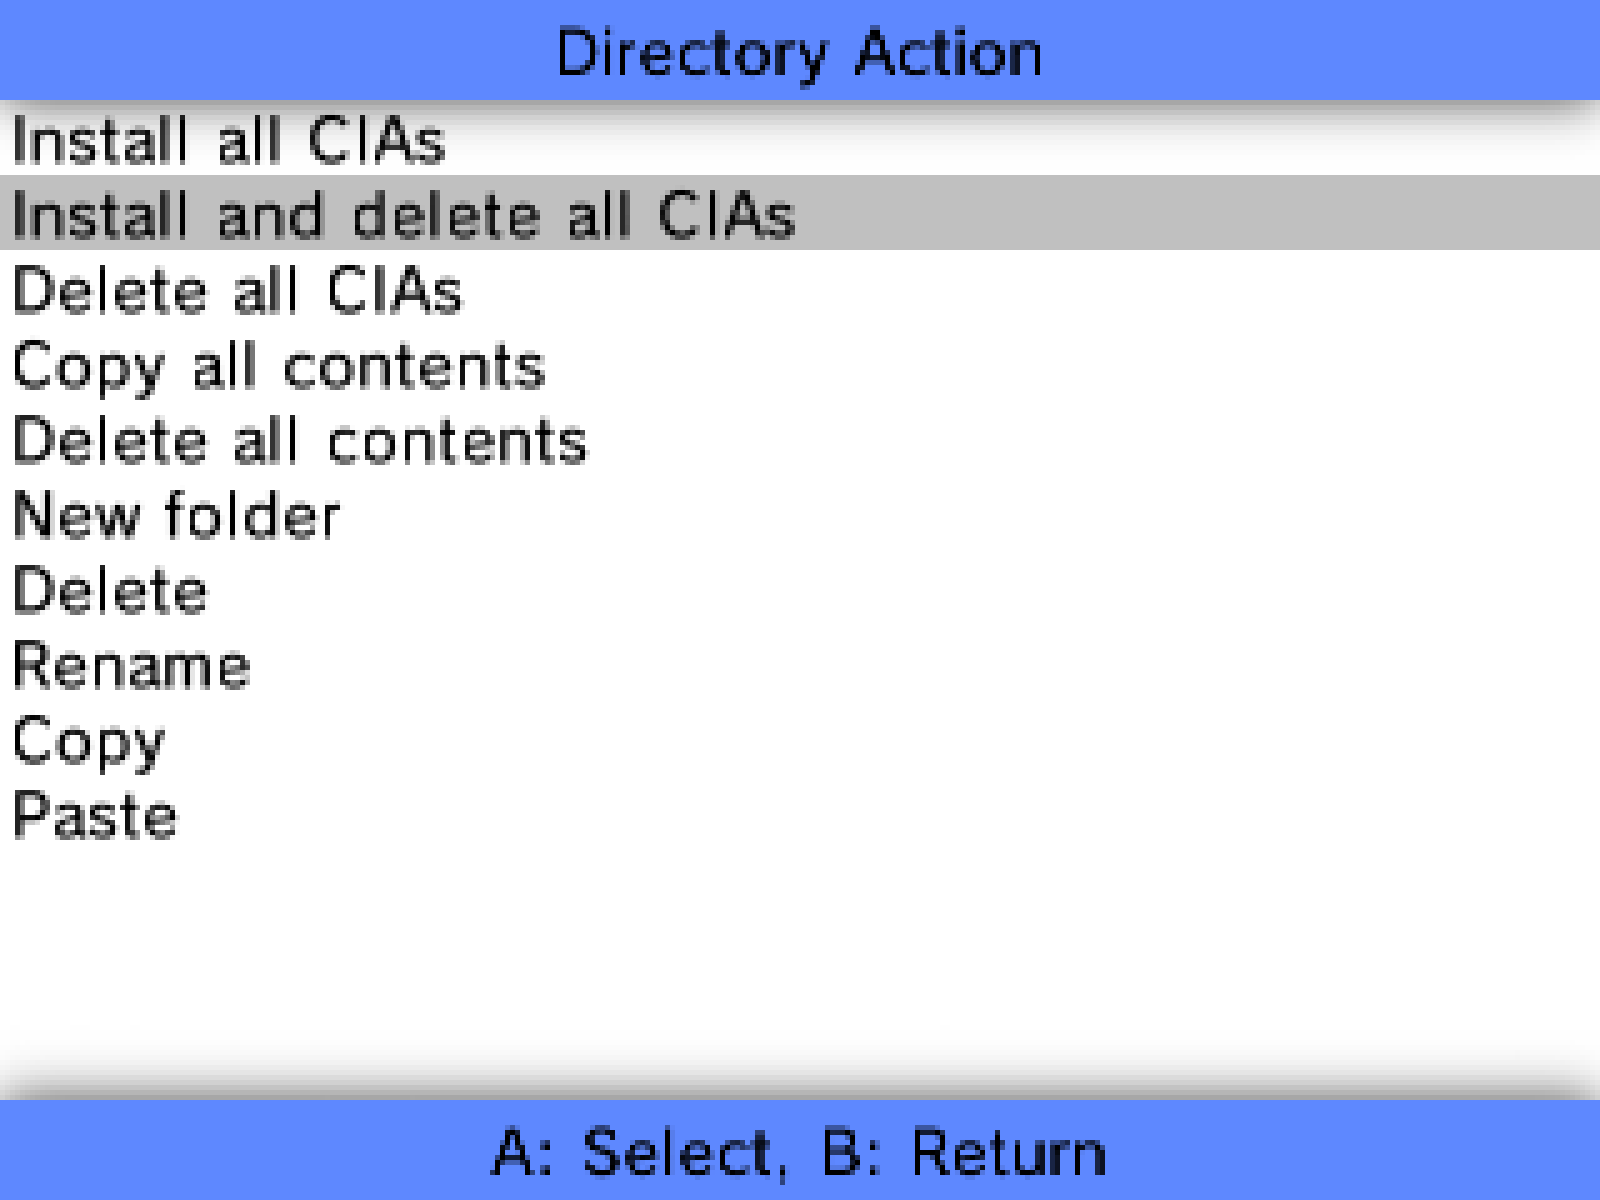 Install and delete all CIAs on the FBI app